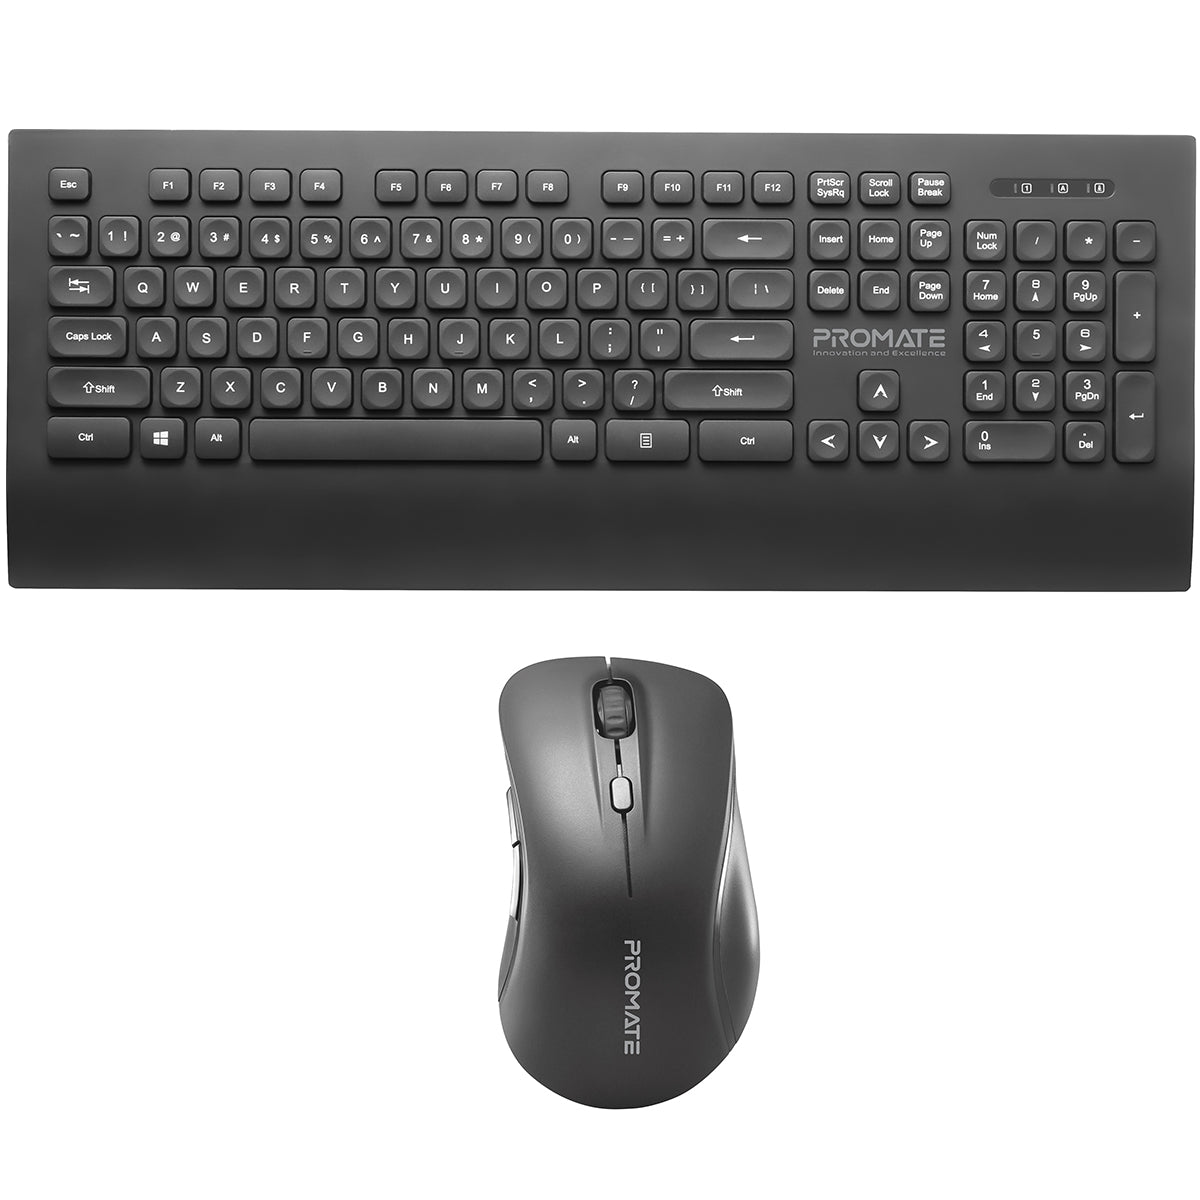 Promate Wireless Keyboard and Mouse, 2.4Ghhz Wireless Full-sized Keyboard with Numeric Keypad, Adjustable Dpi Wireless Mouse, Palm Rest, Nano USB Receiver and Power Saving Mode for PC, Desktop, Computer, Notebook, Laptop, ProCombo-7 English